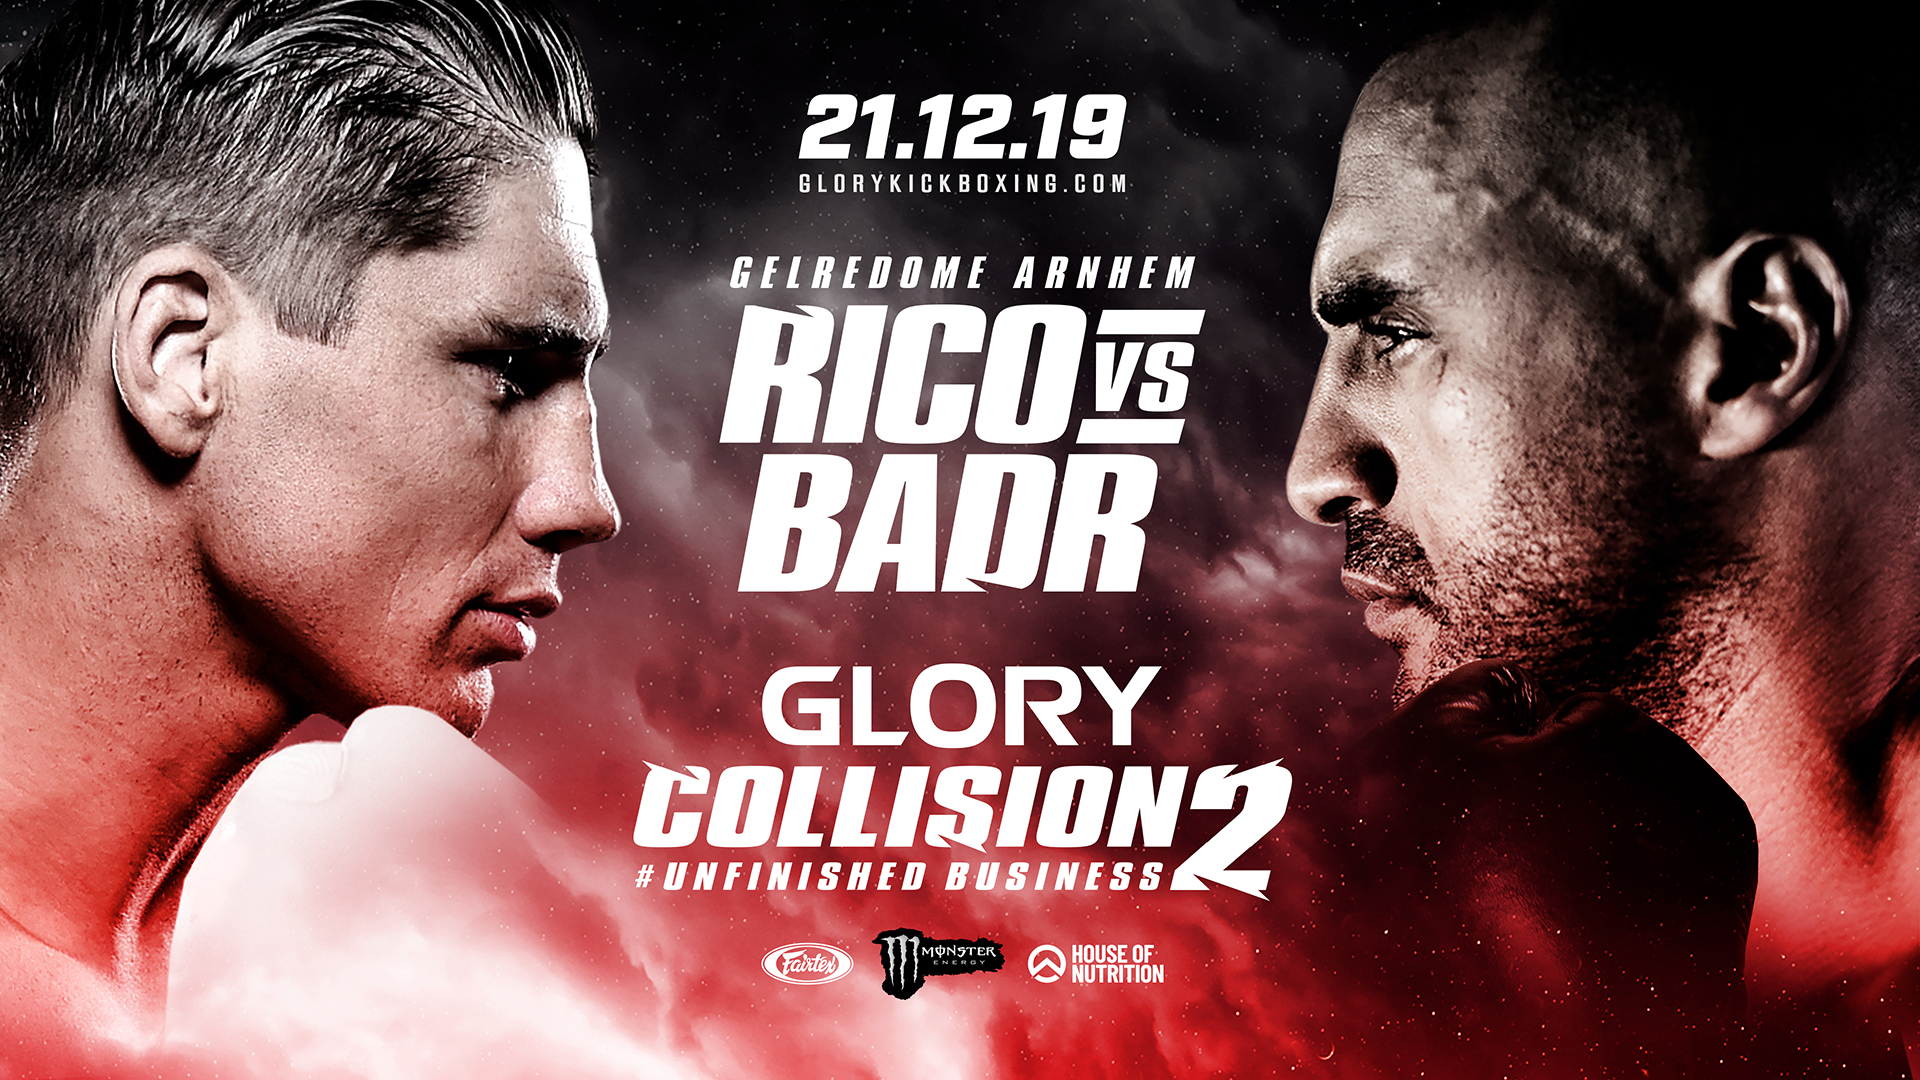 Tickets on sale next week for GLORY: COLLISION 2